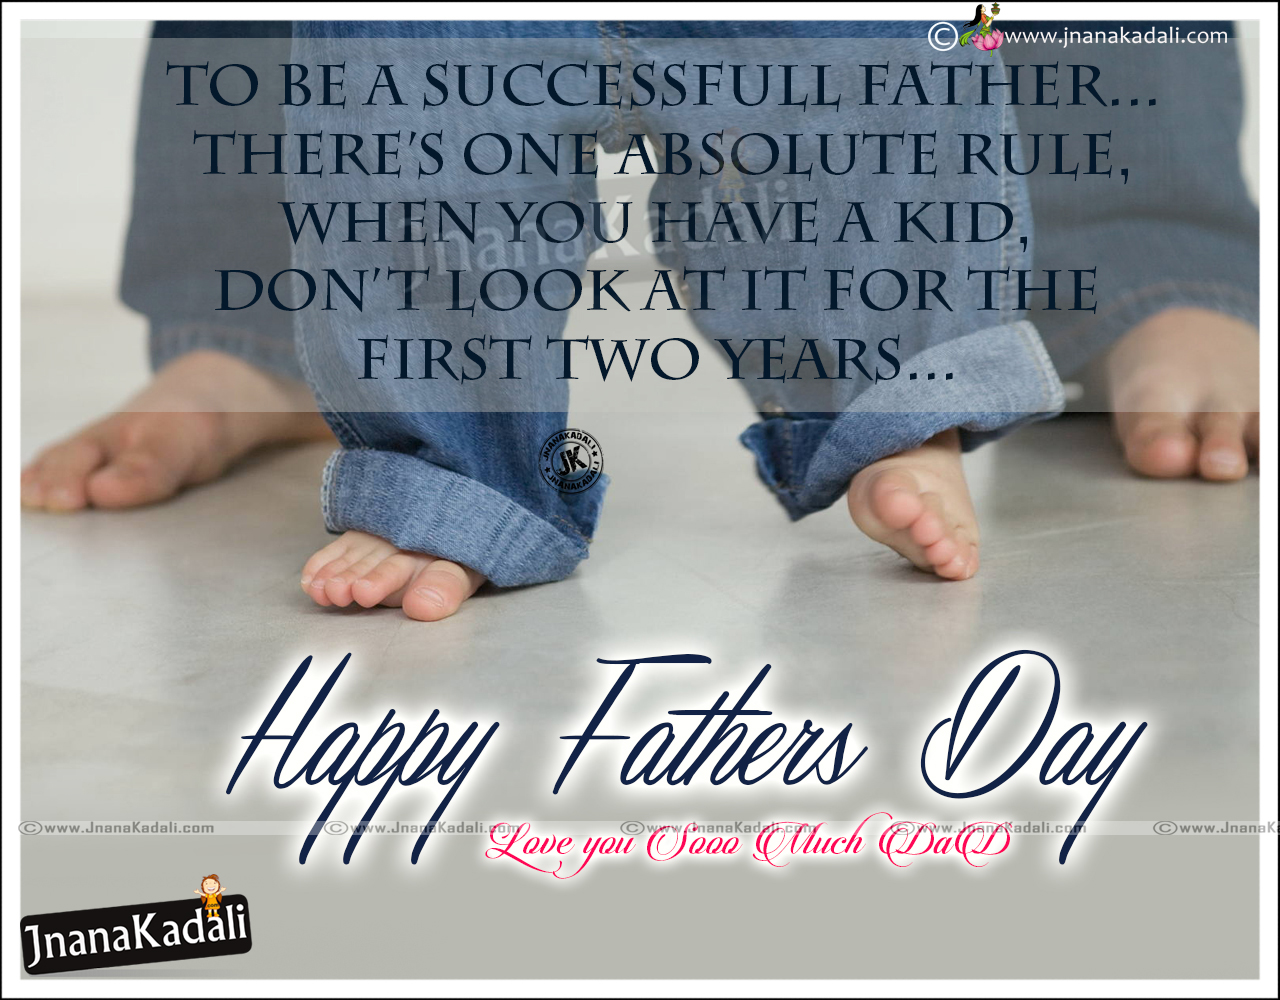 Happy Fathers Day 2016 Greeting with Quotations | JNANA KADALI.COM ...